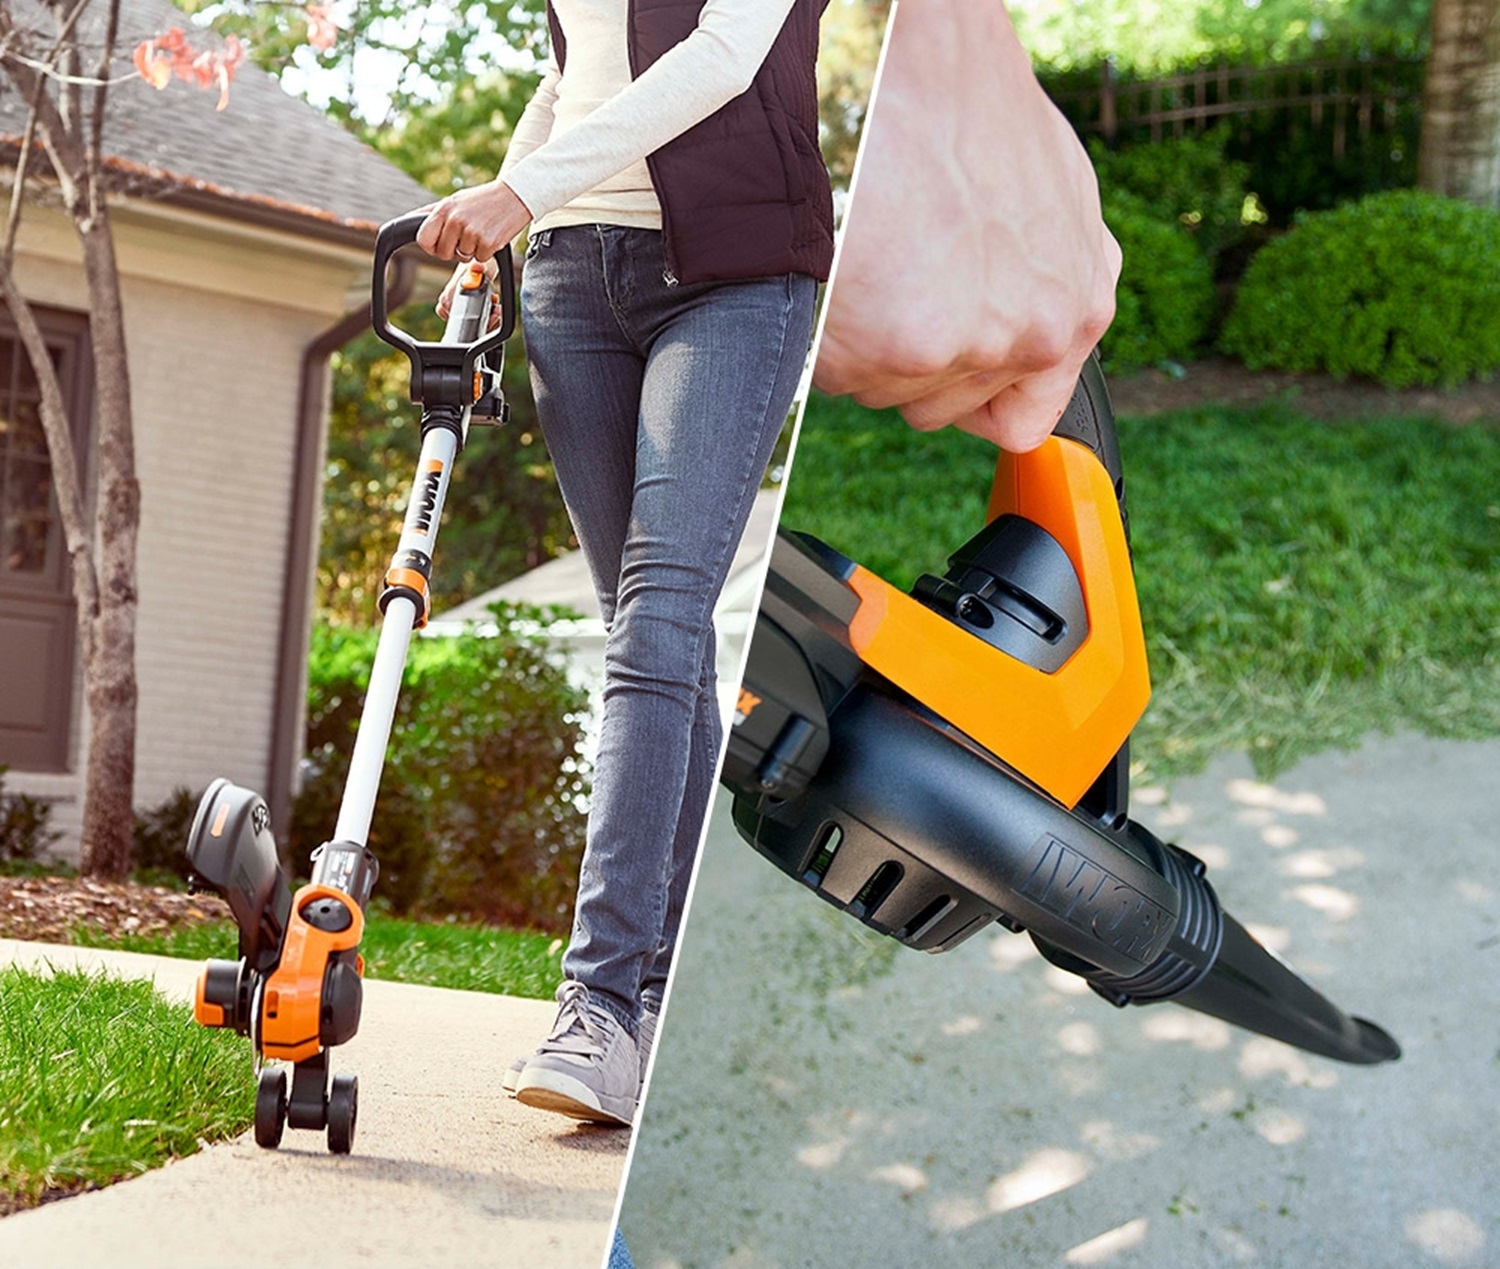 Best Buy: WORX 20V Cordless String Trimmer and Air Blower Combo